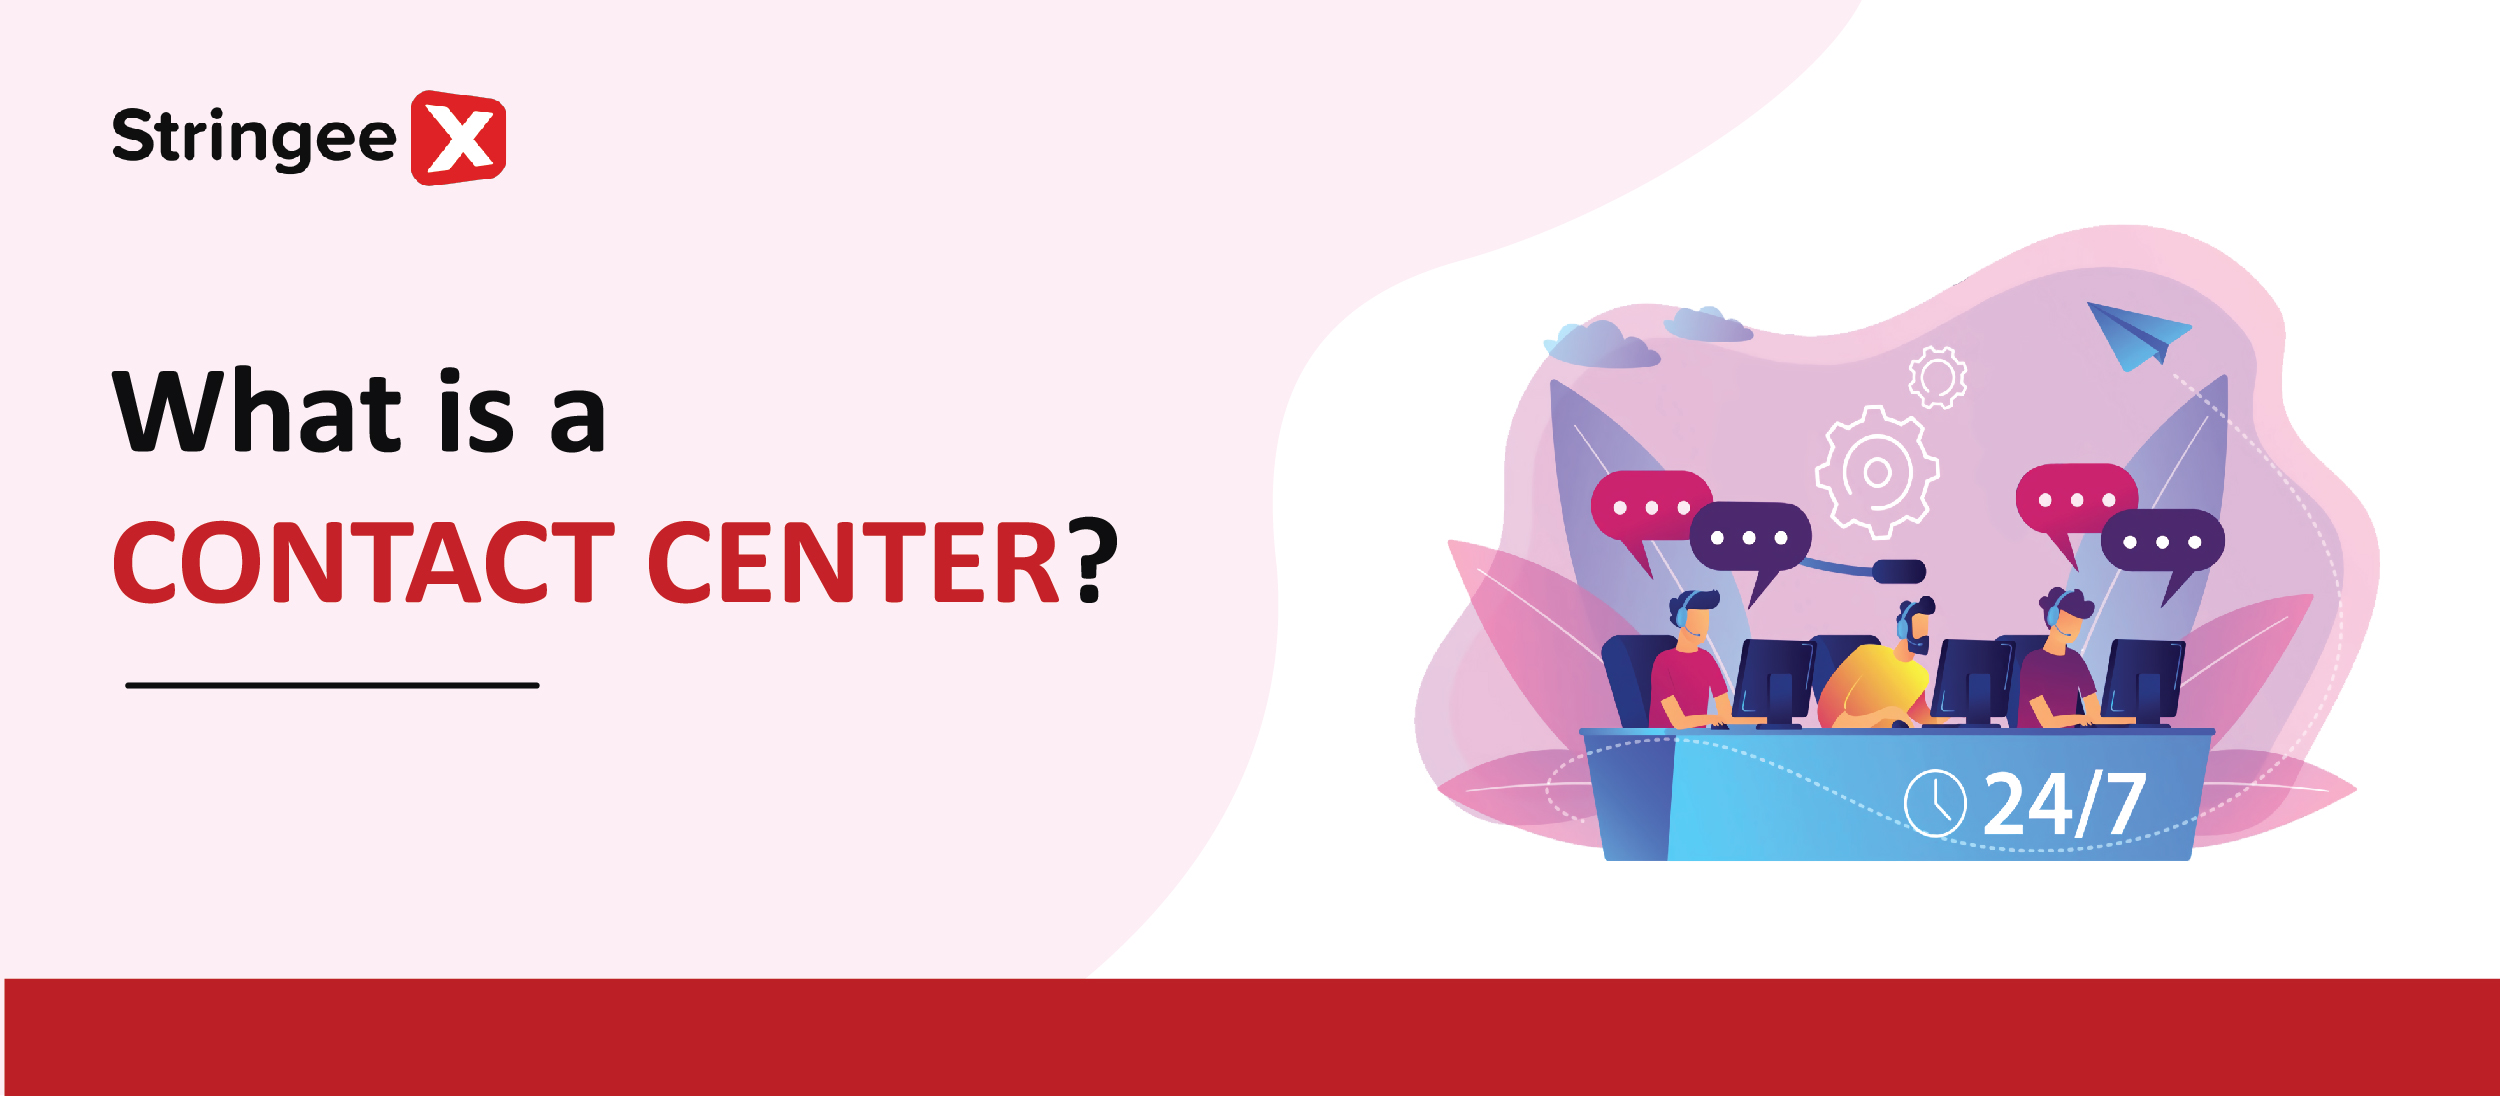 What is a contact center?